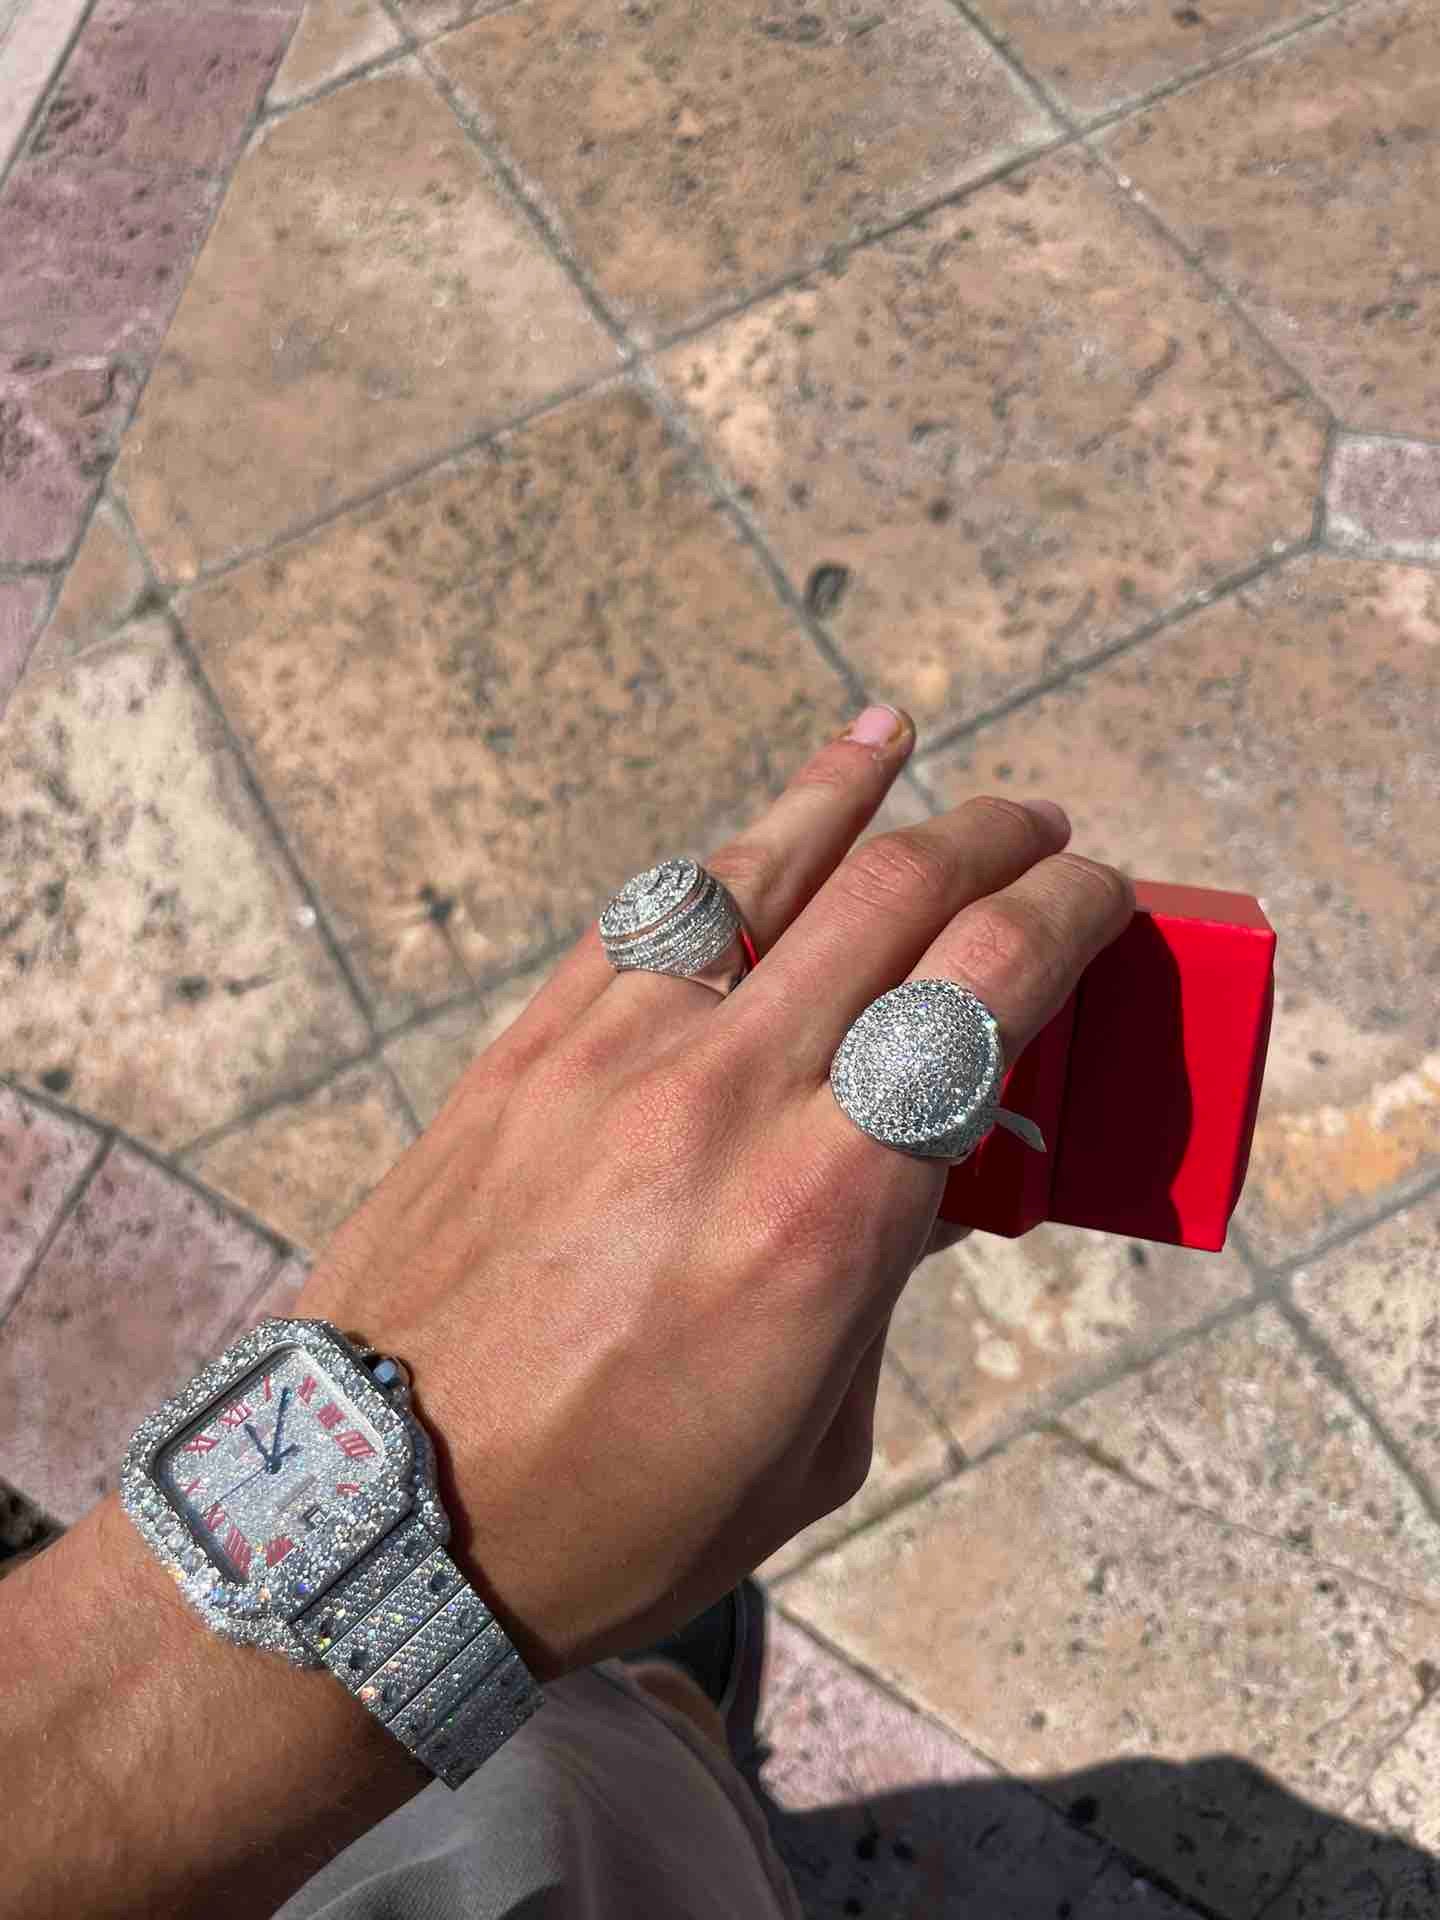 "14k White Gold Iced Out Championship Ring"